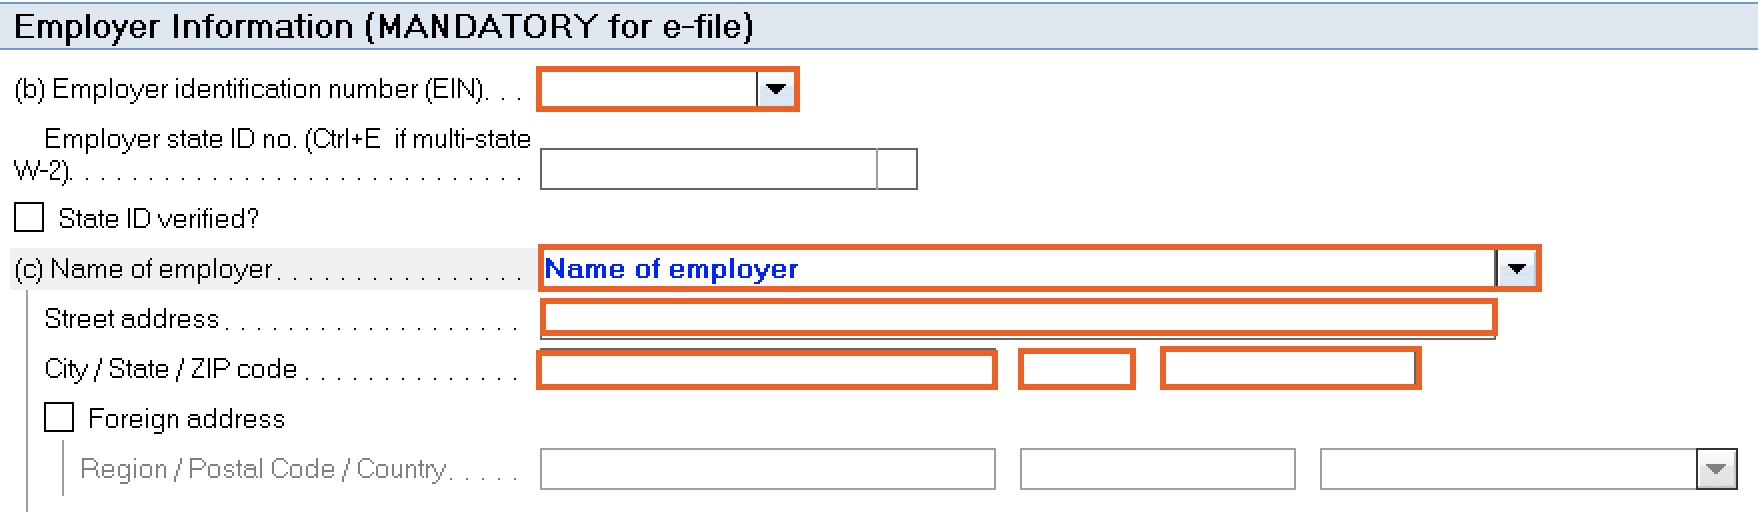 employer-information-w2-lacerte.png